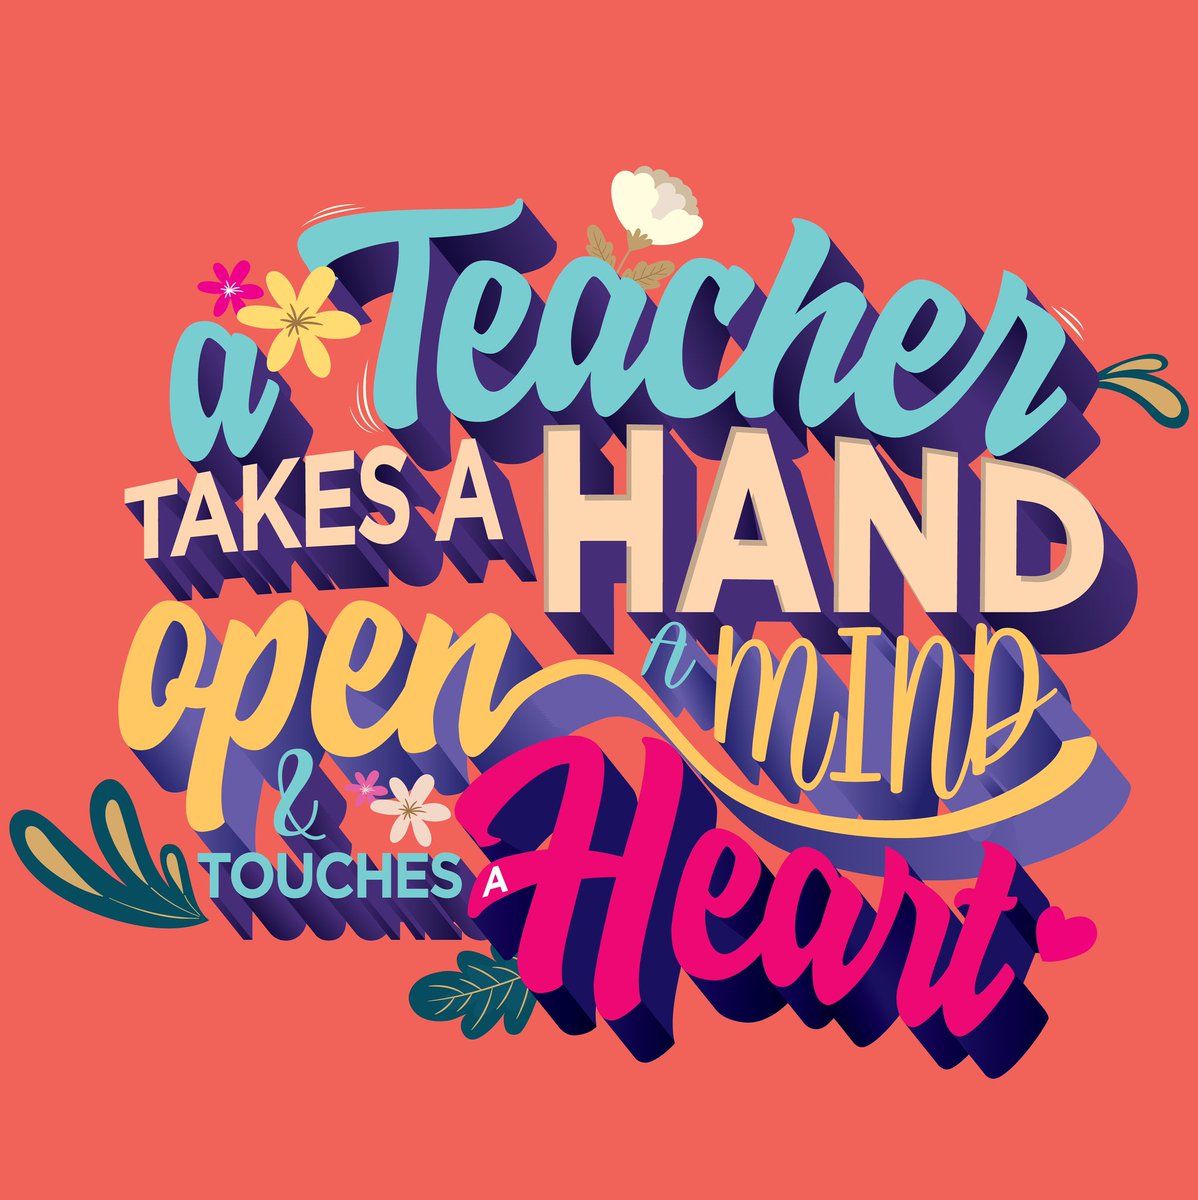 Thank you to all of our teachers and school staff that make the days of our children, every single day. #WorldTeachersDay2021